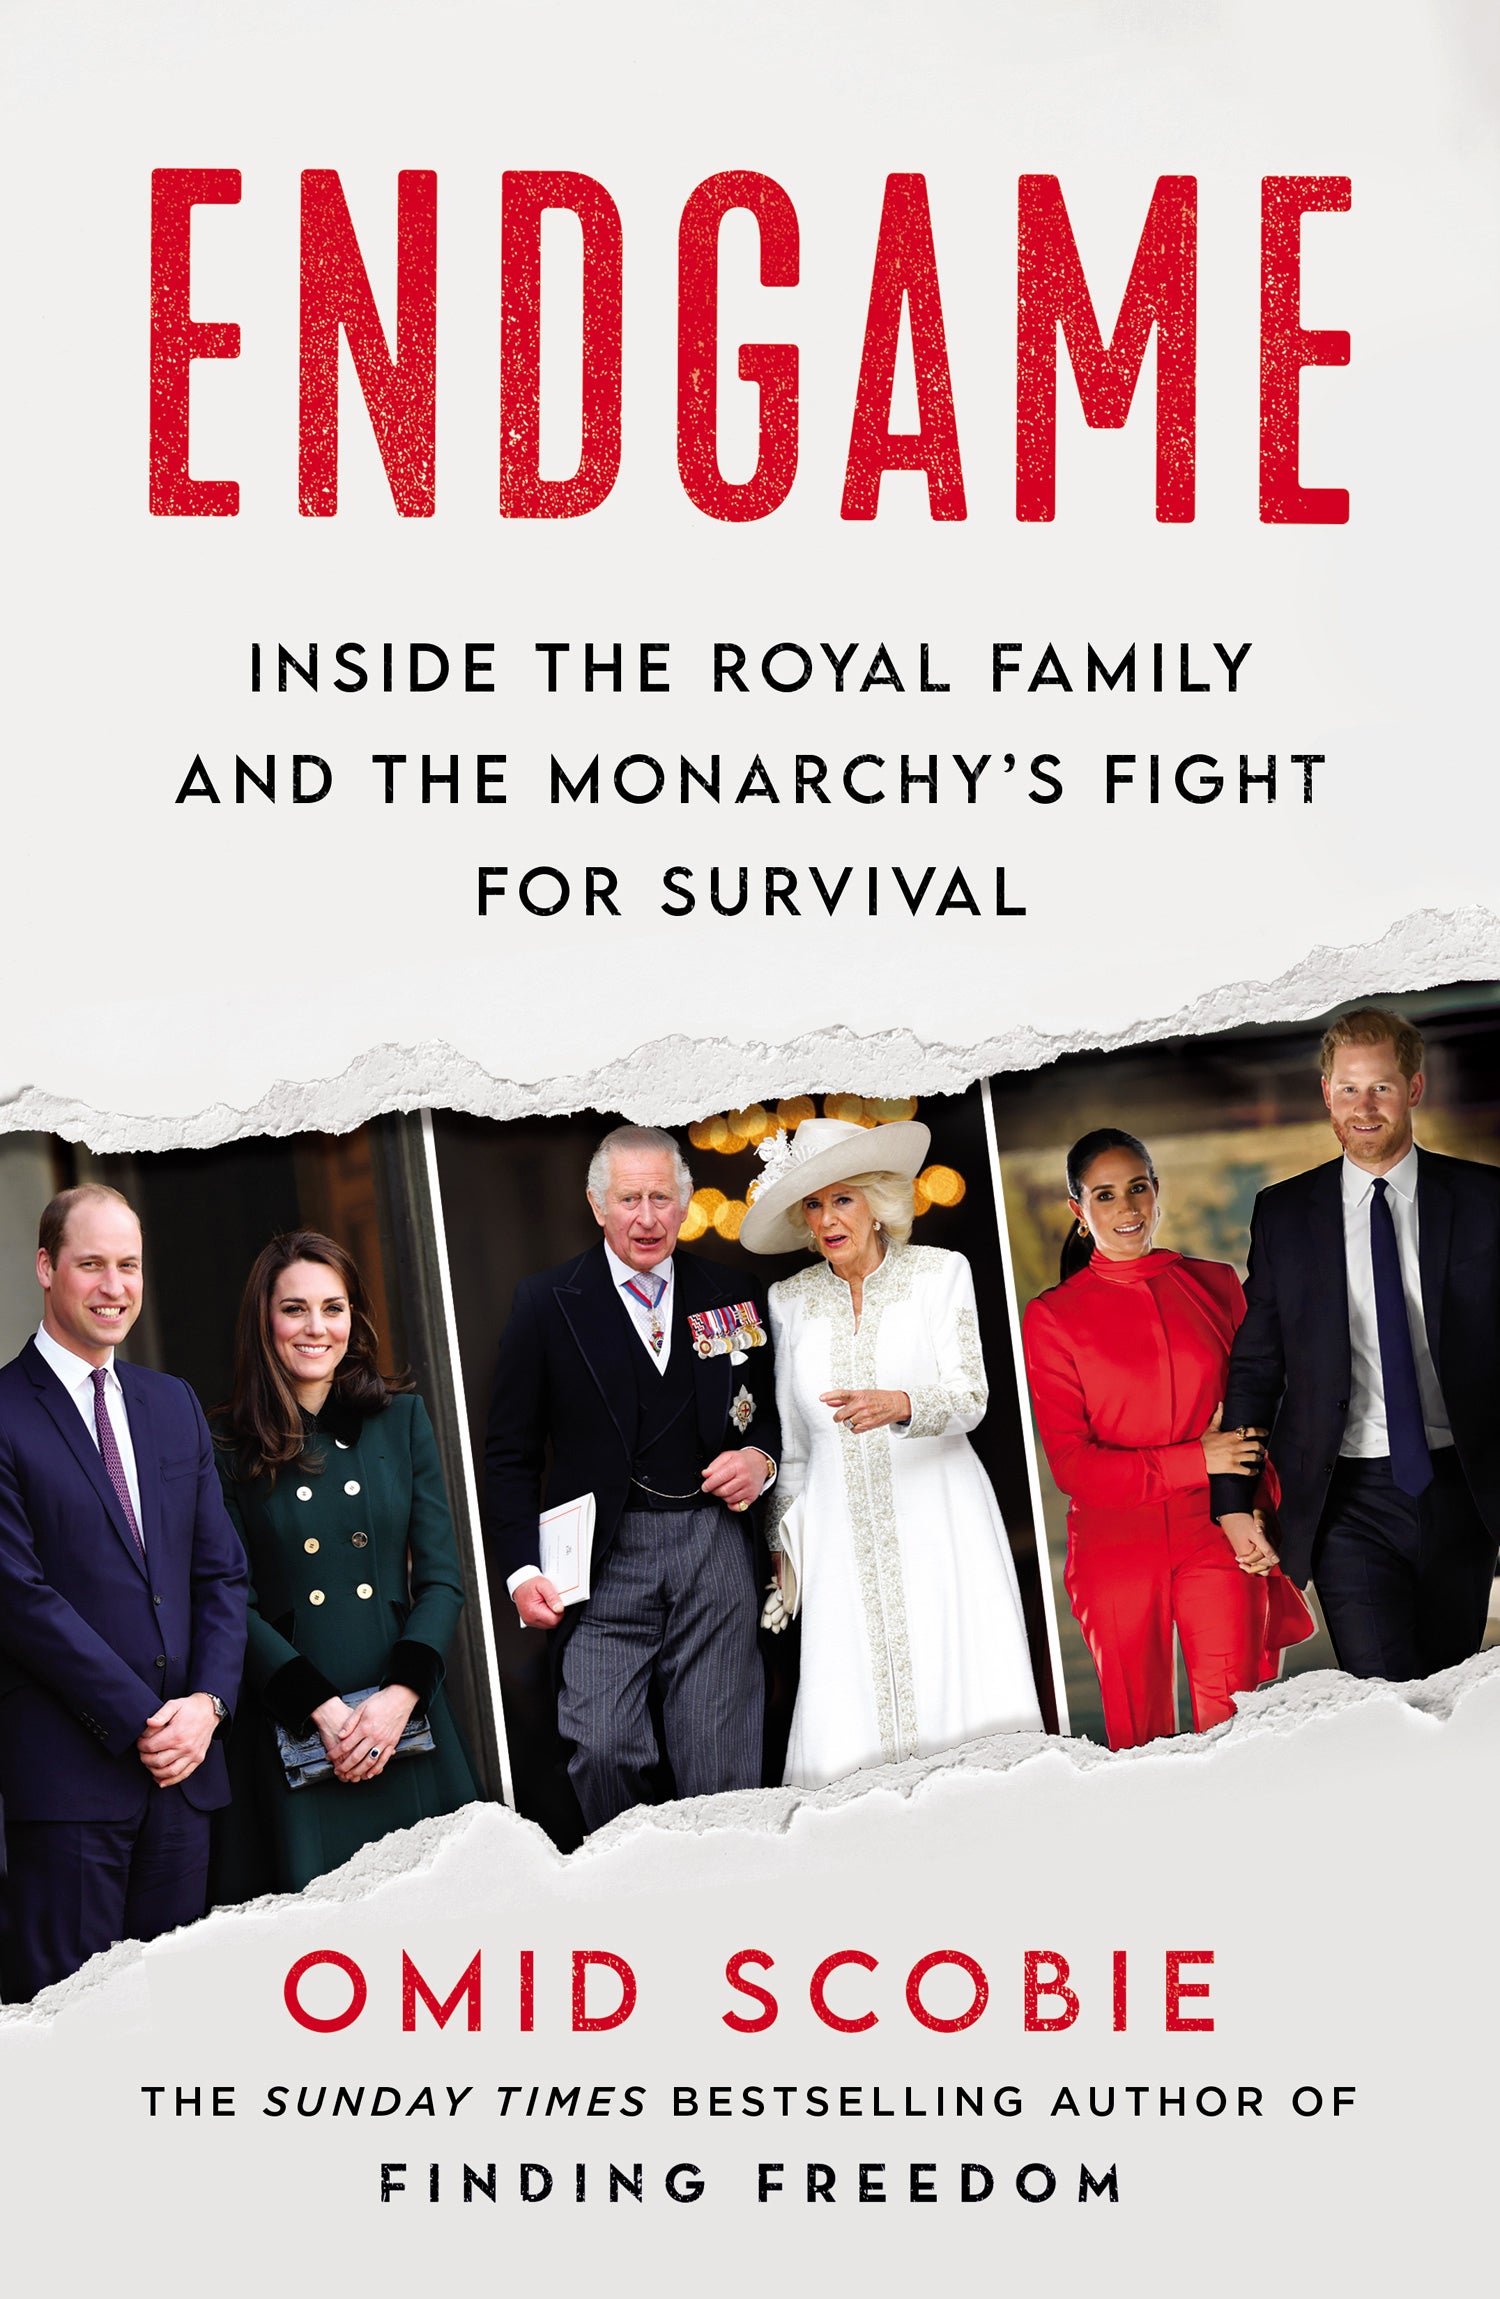 The new book contains various claims about the royal family